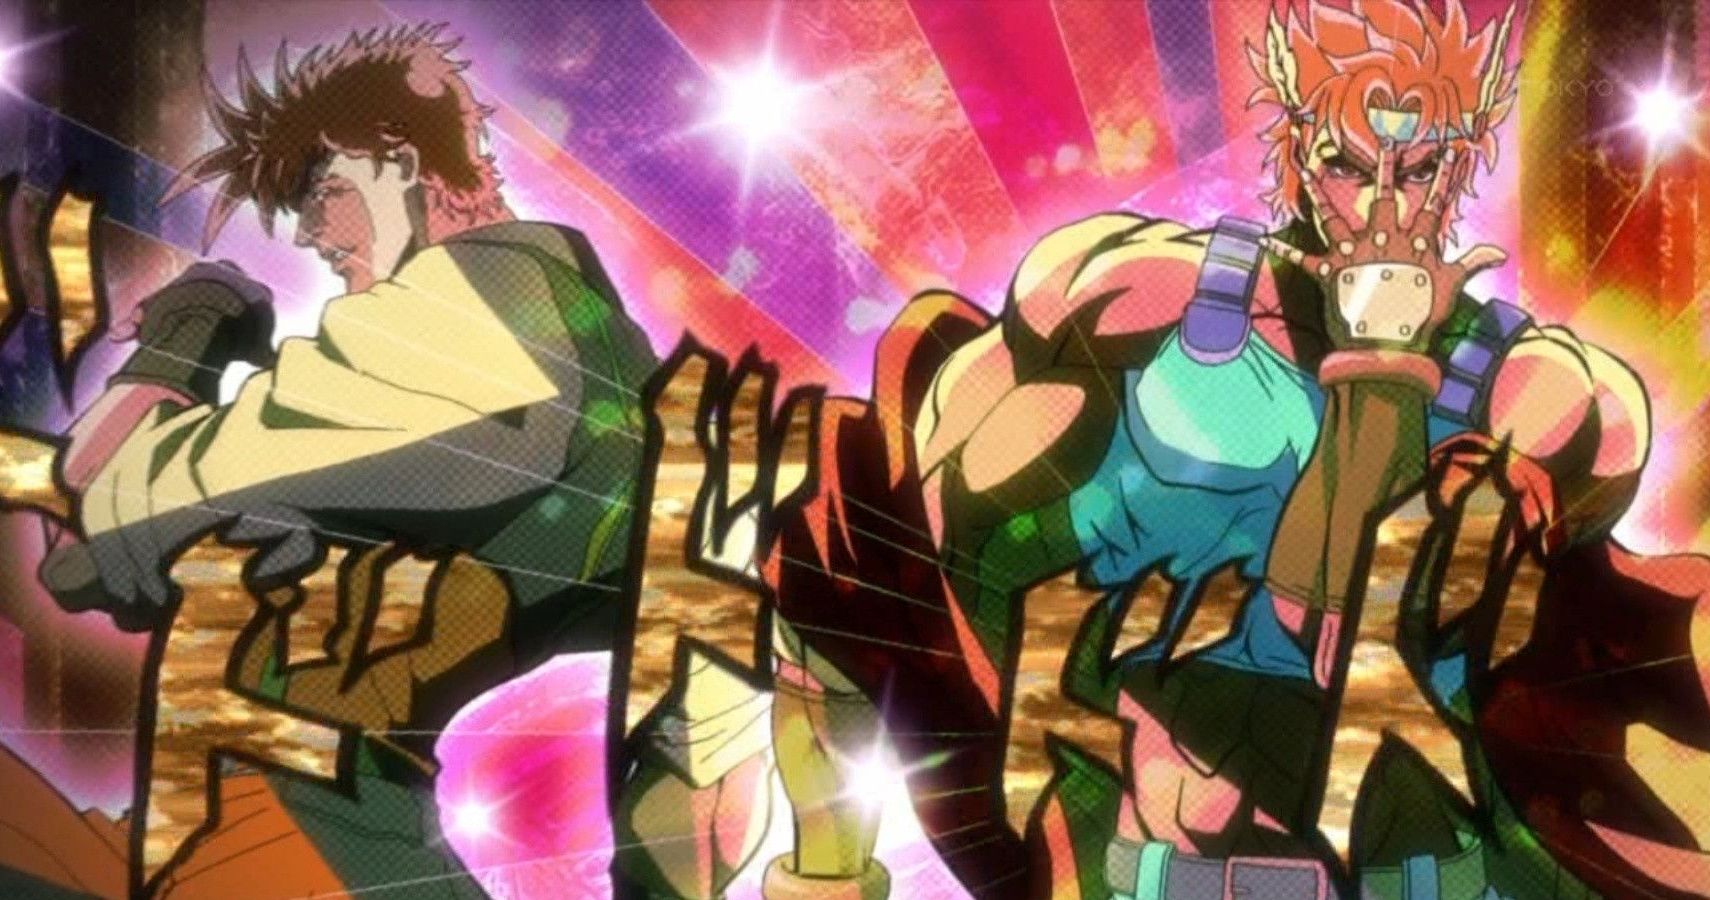 5 JoJo's Bizarre Adventure References in Video Games You May Have Missed